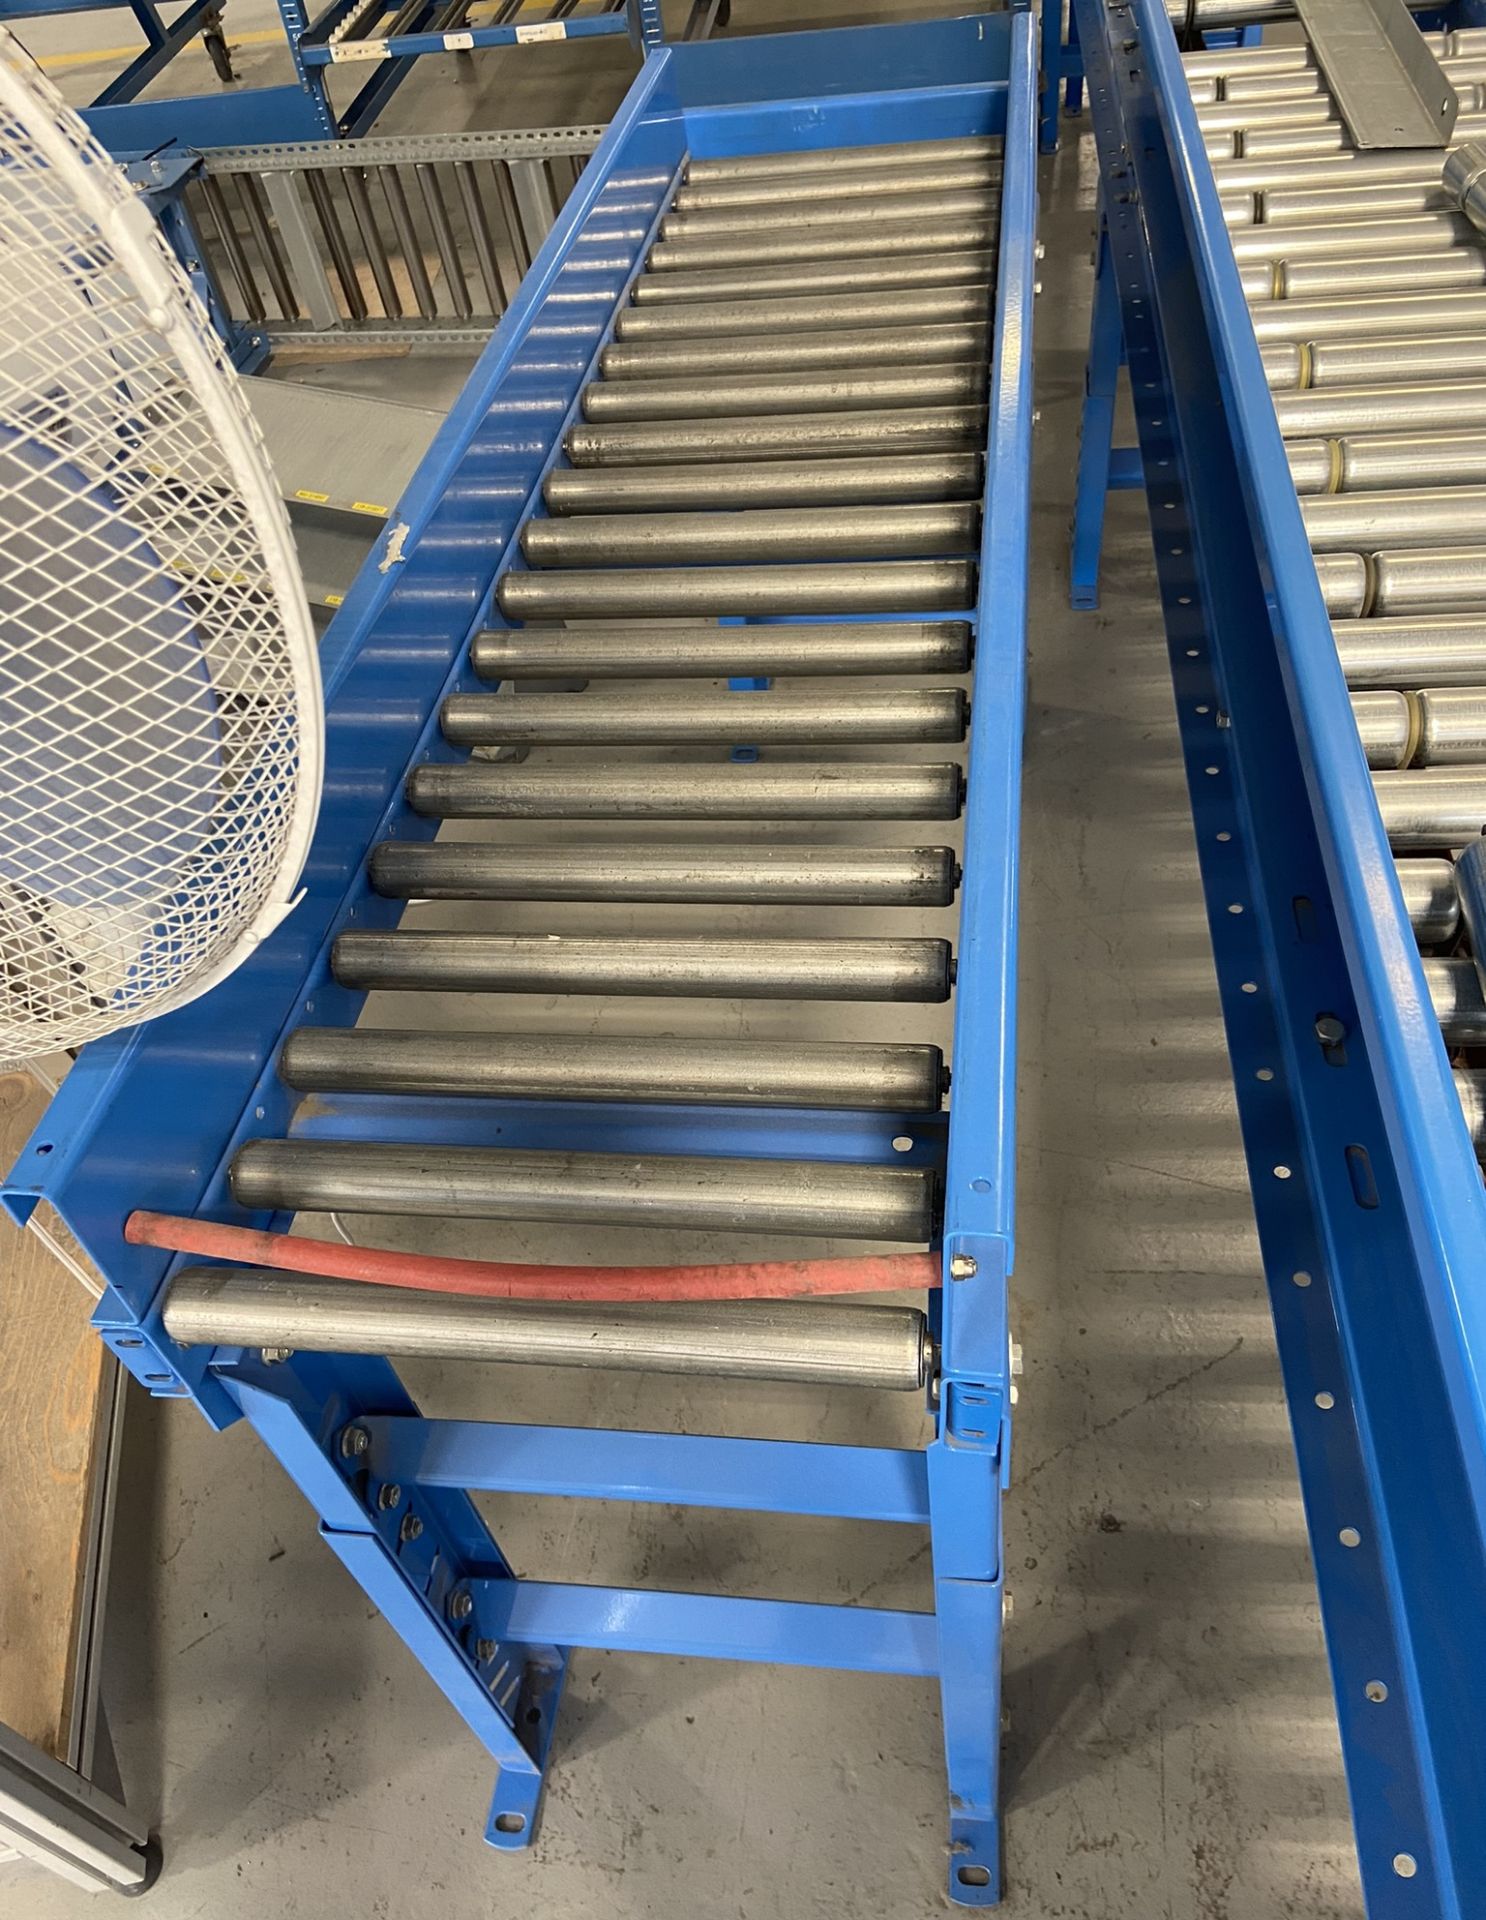 Gravity Roller Conveyors - Multiple (20+) - Image 10 of 21